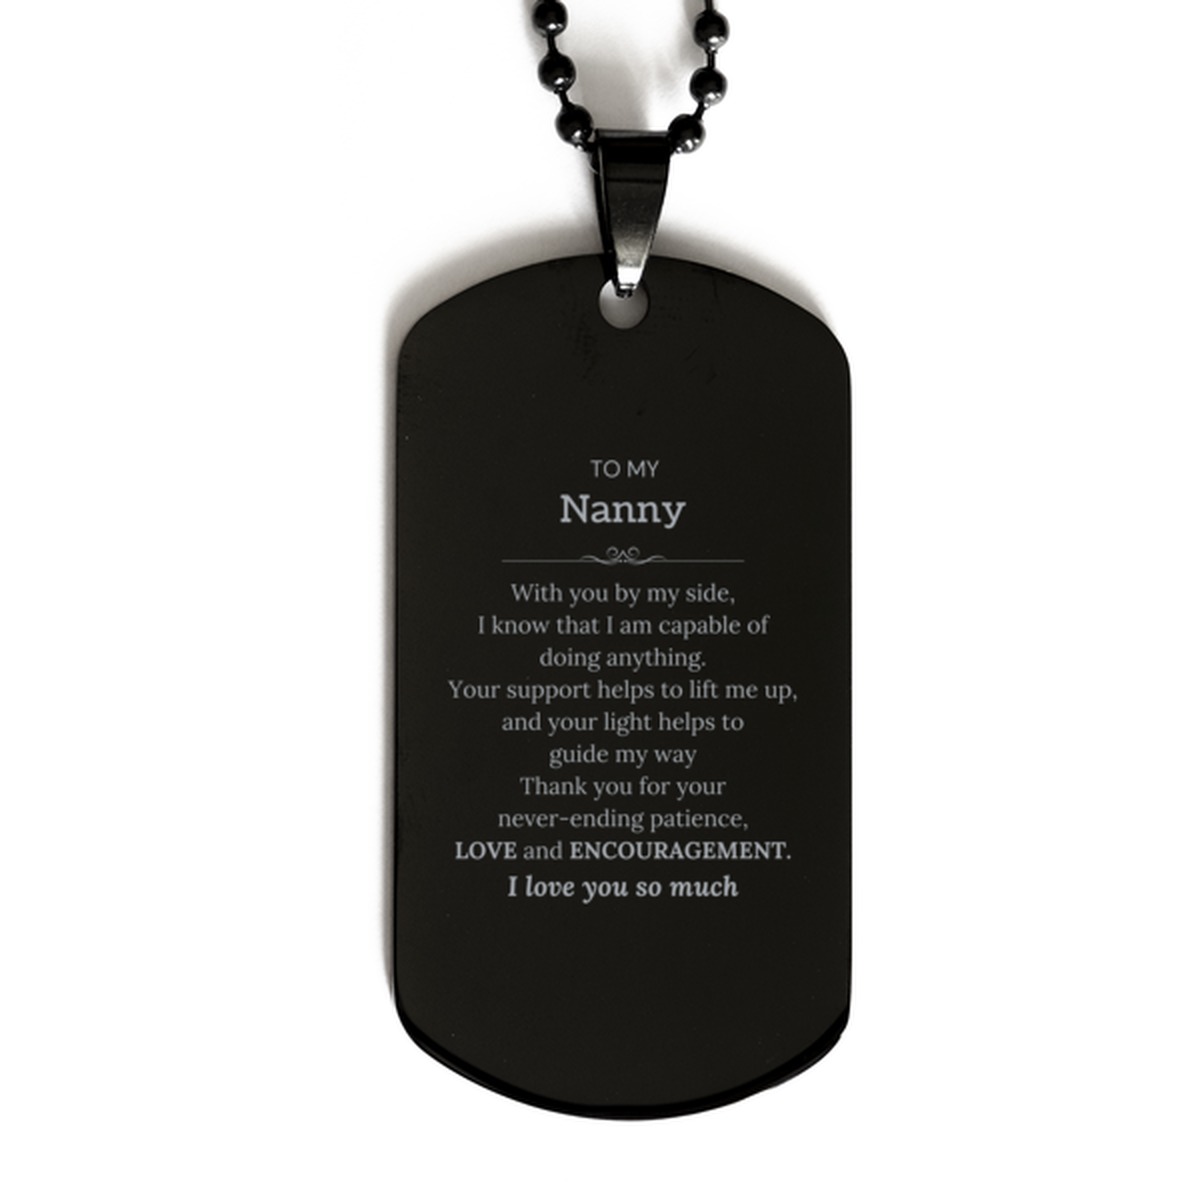 Appreciation Nanny Black Dog Tag Gifts, To My Nanny Birthday Christmas Wedding Keepsake Gifts for Nanny With you by my side, I know that I am capable of doing anything. I love you so much